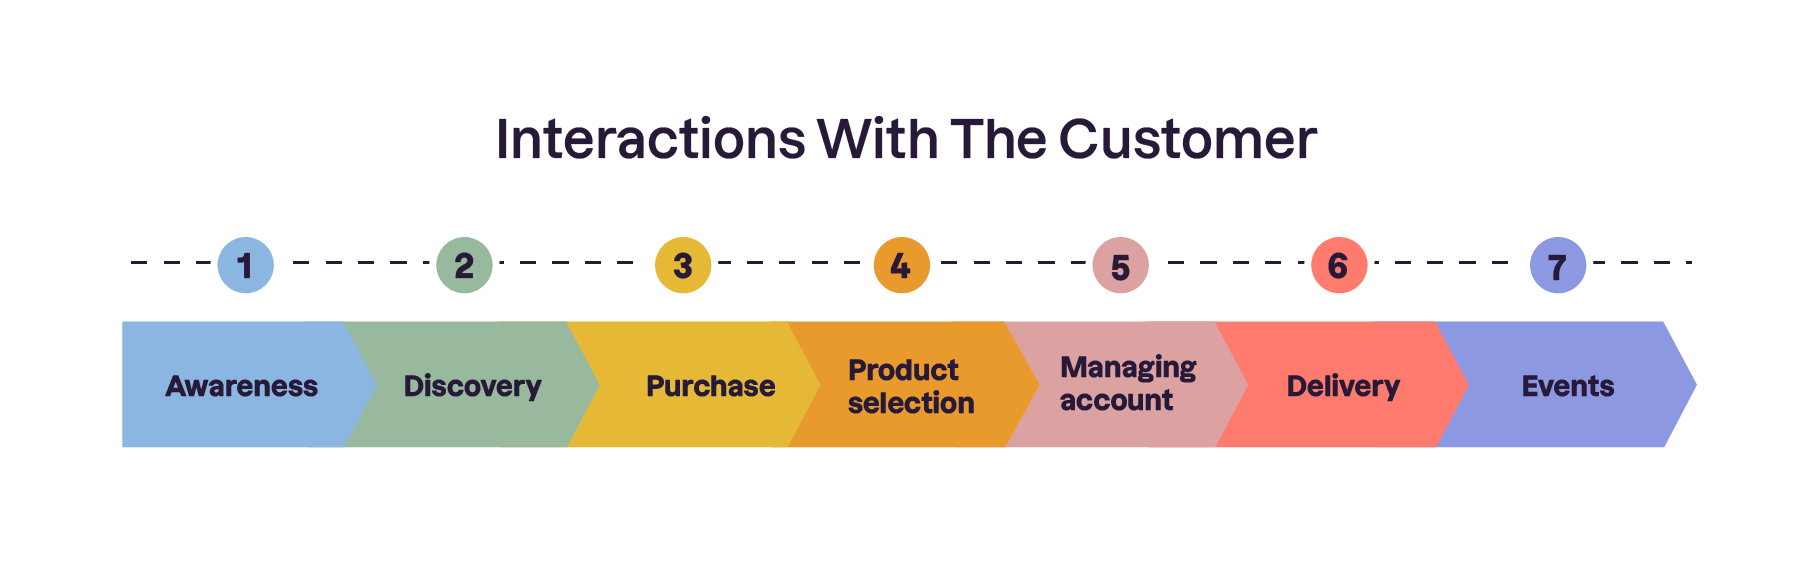 Seven steps of customer interactions represented as a journey: Awareness, Discovery, Purchase, Product selection, Managing their account, Delivery, Events